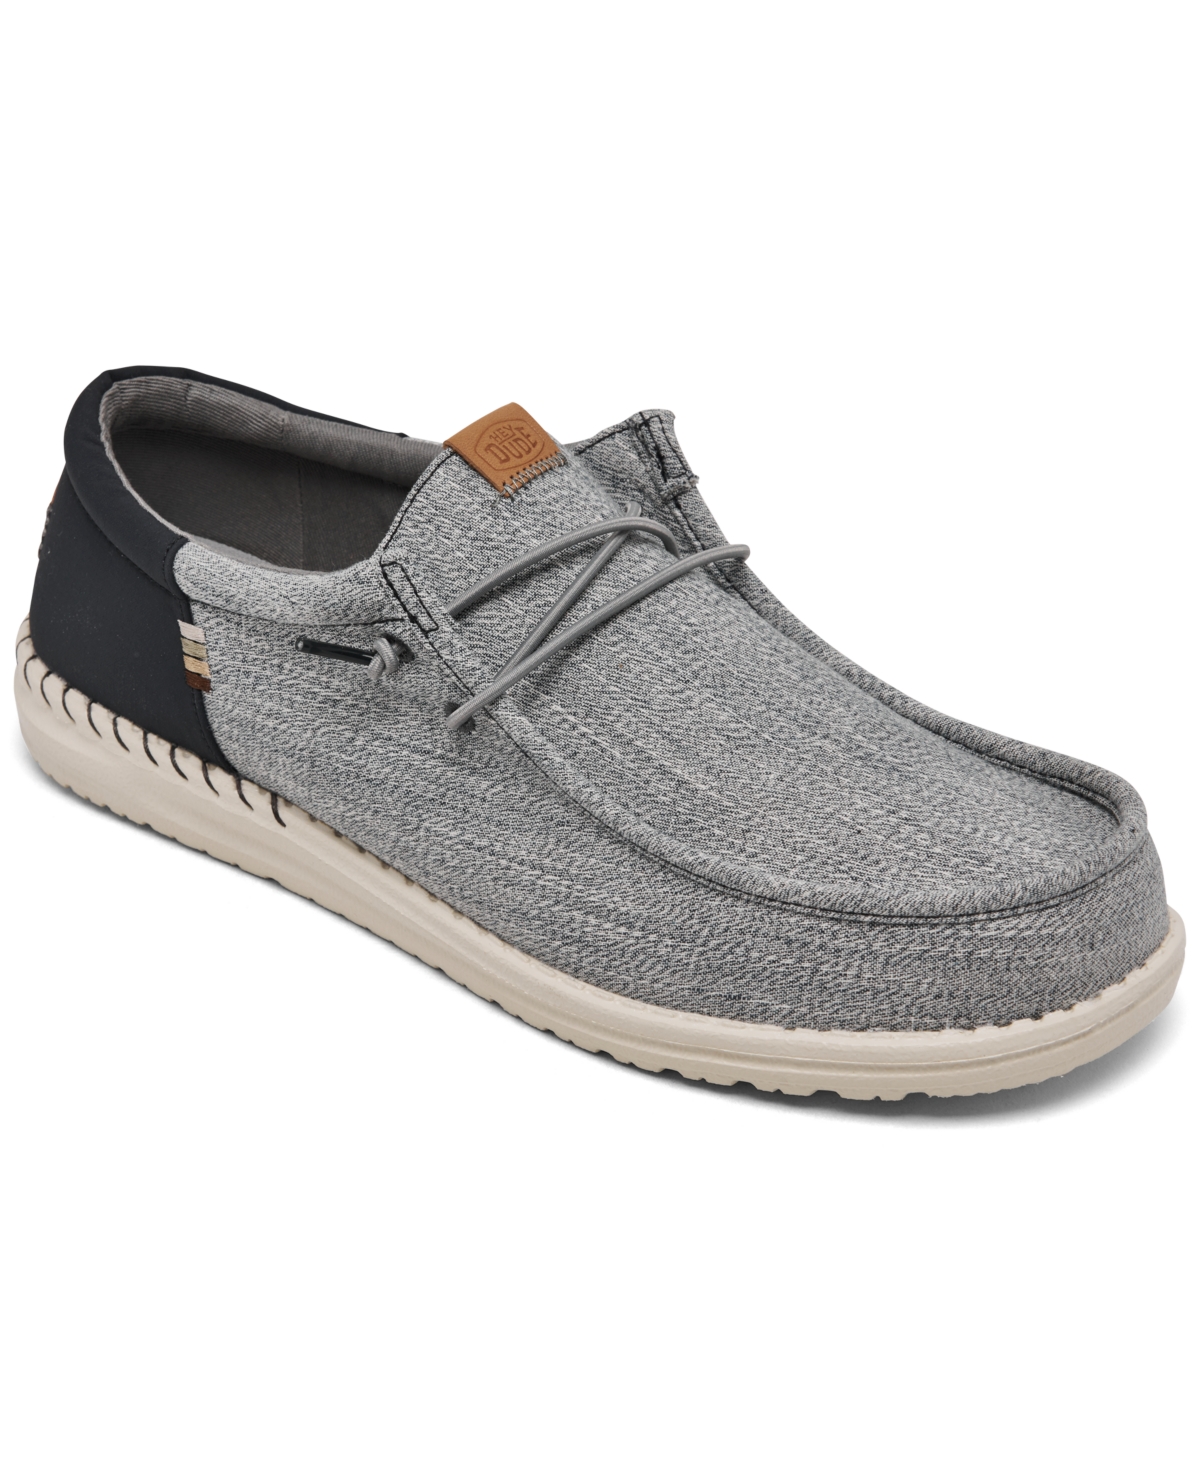 Men's Wally Funk Nylon Craft Casual Moccasin Sneakers from Finish Line - Grey/Black